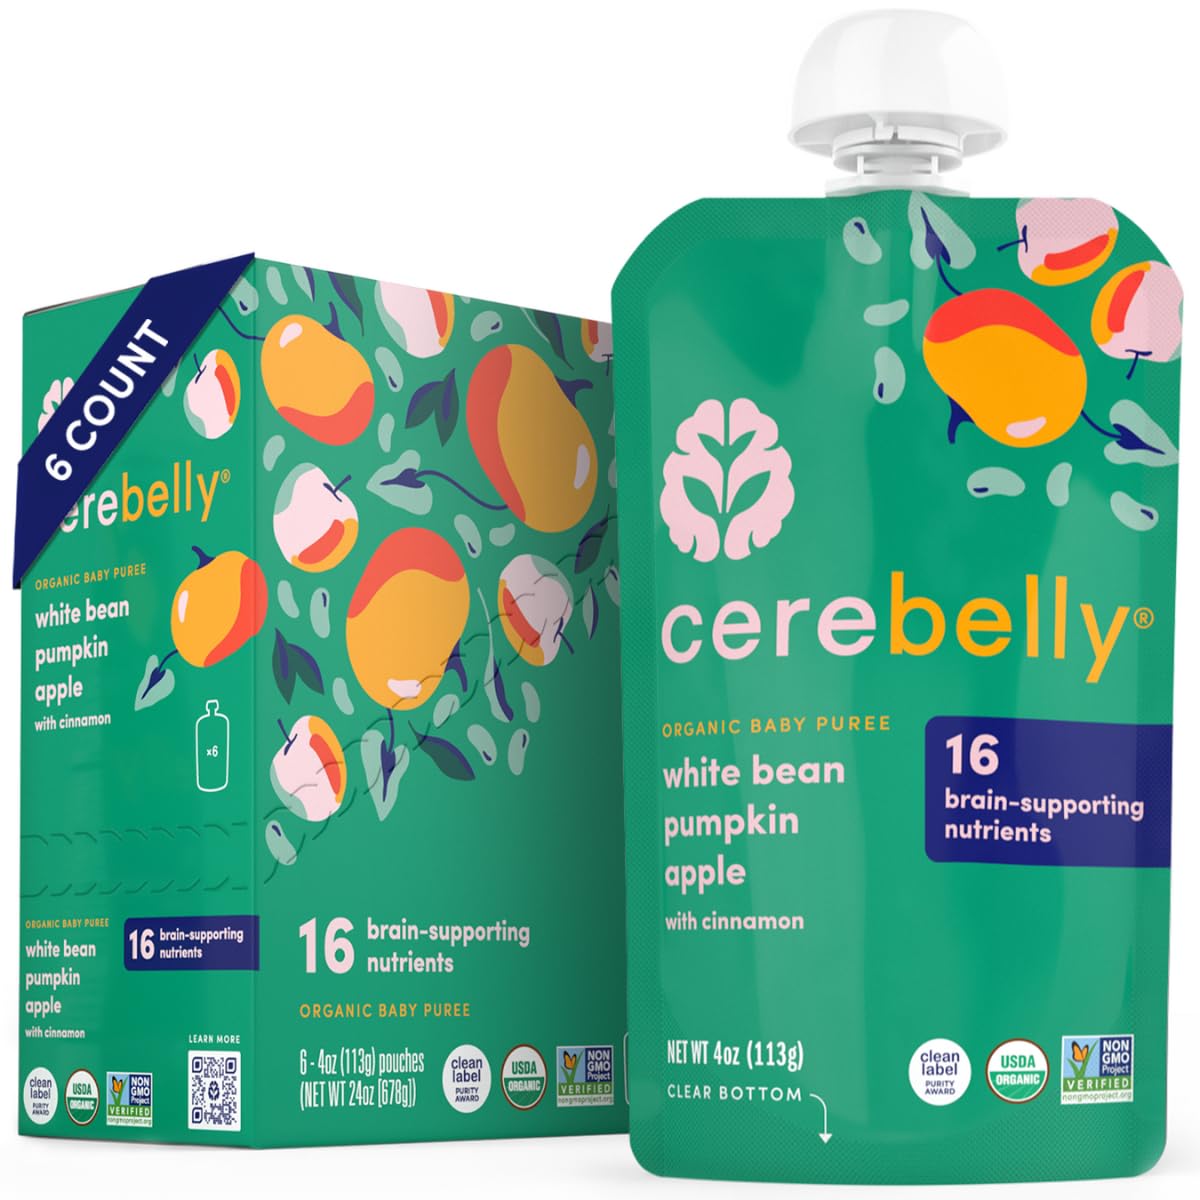 Cerebelly Baby Food Pouches – White Bean Pumpkin Apple (4 oz, Pack of 6) Toddler Snacks - 16 Brain-supporting Nutrients from Superfoods - Healthy Snacks, Dairy Free, BPA-Free, Non-GMO, No Added Sugar